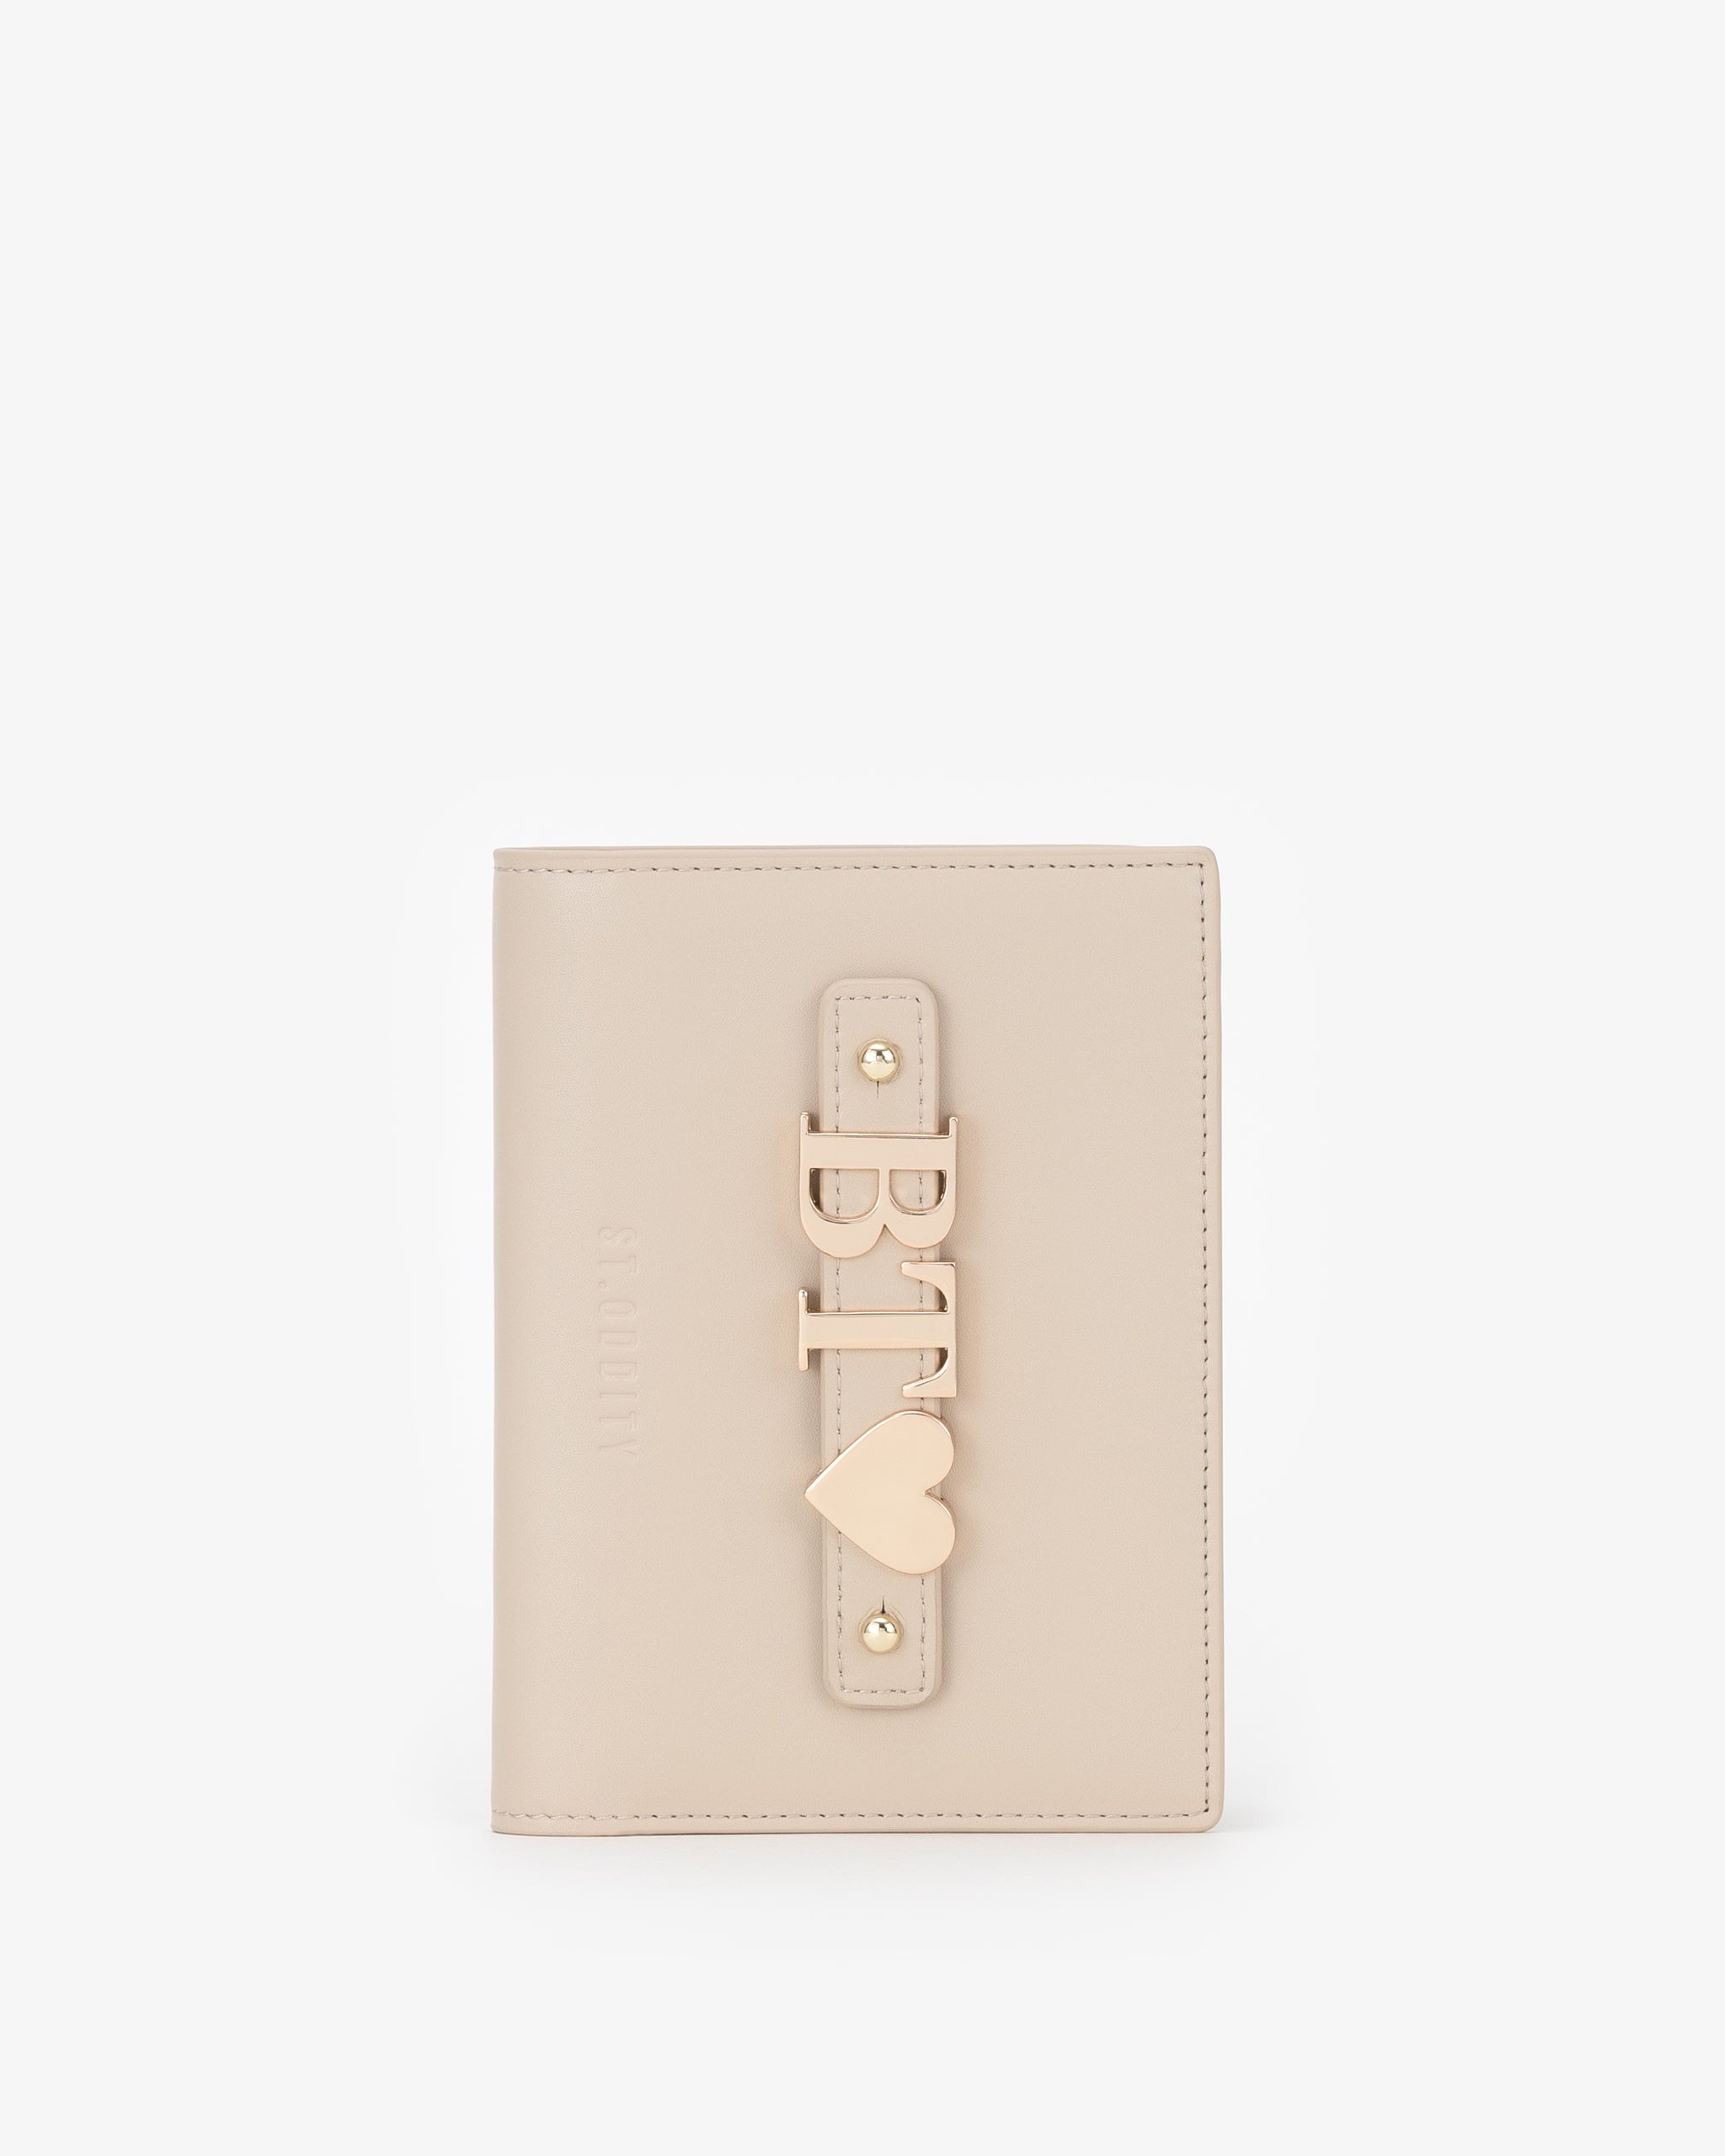 Travel Wallet in Light Sand with Personalised Hardware